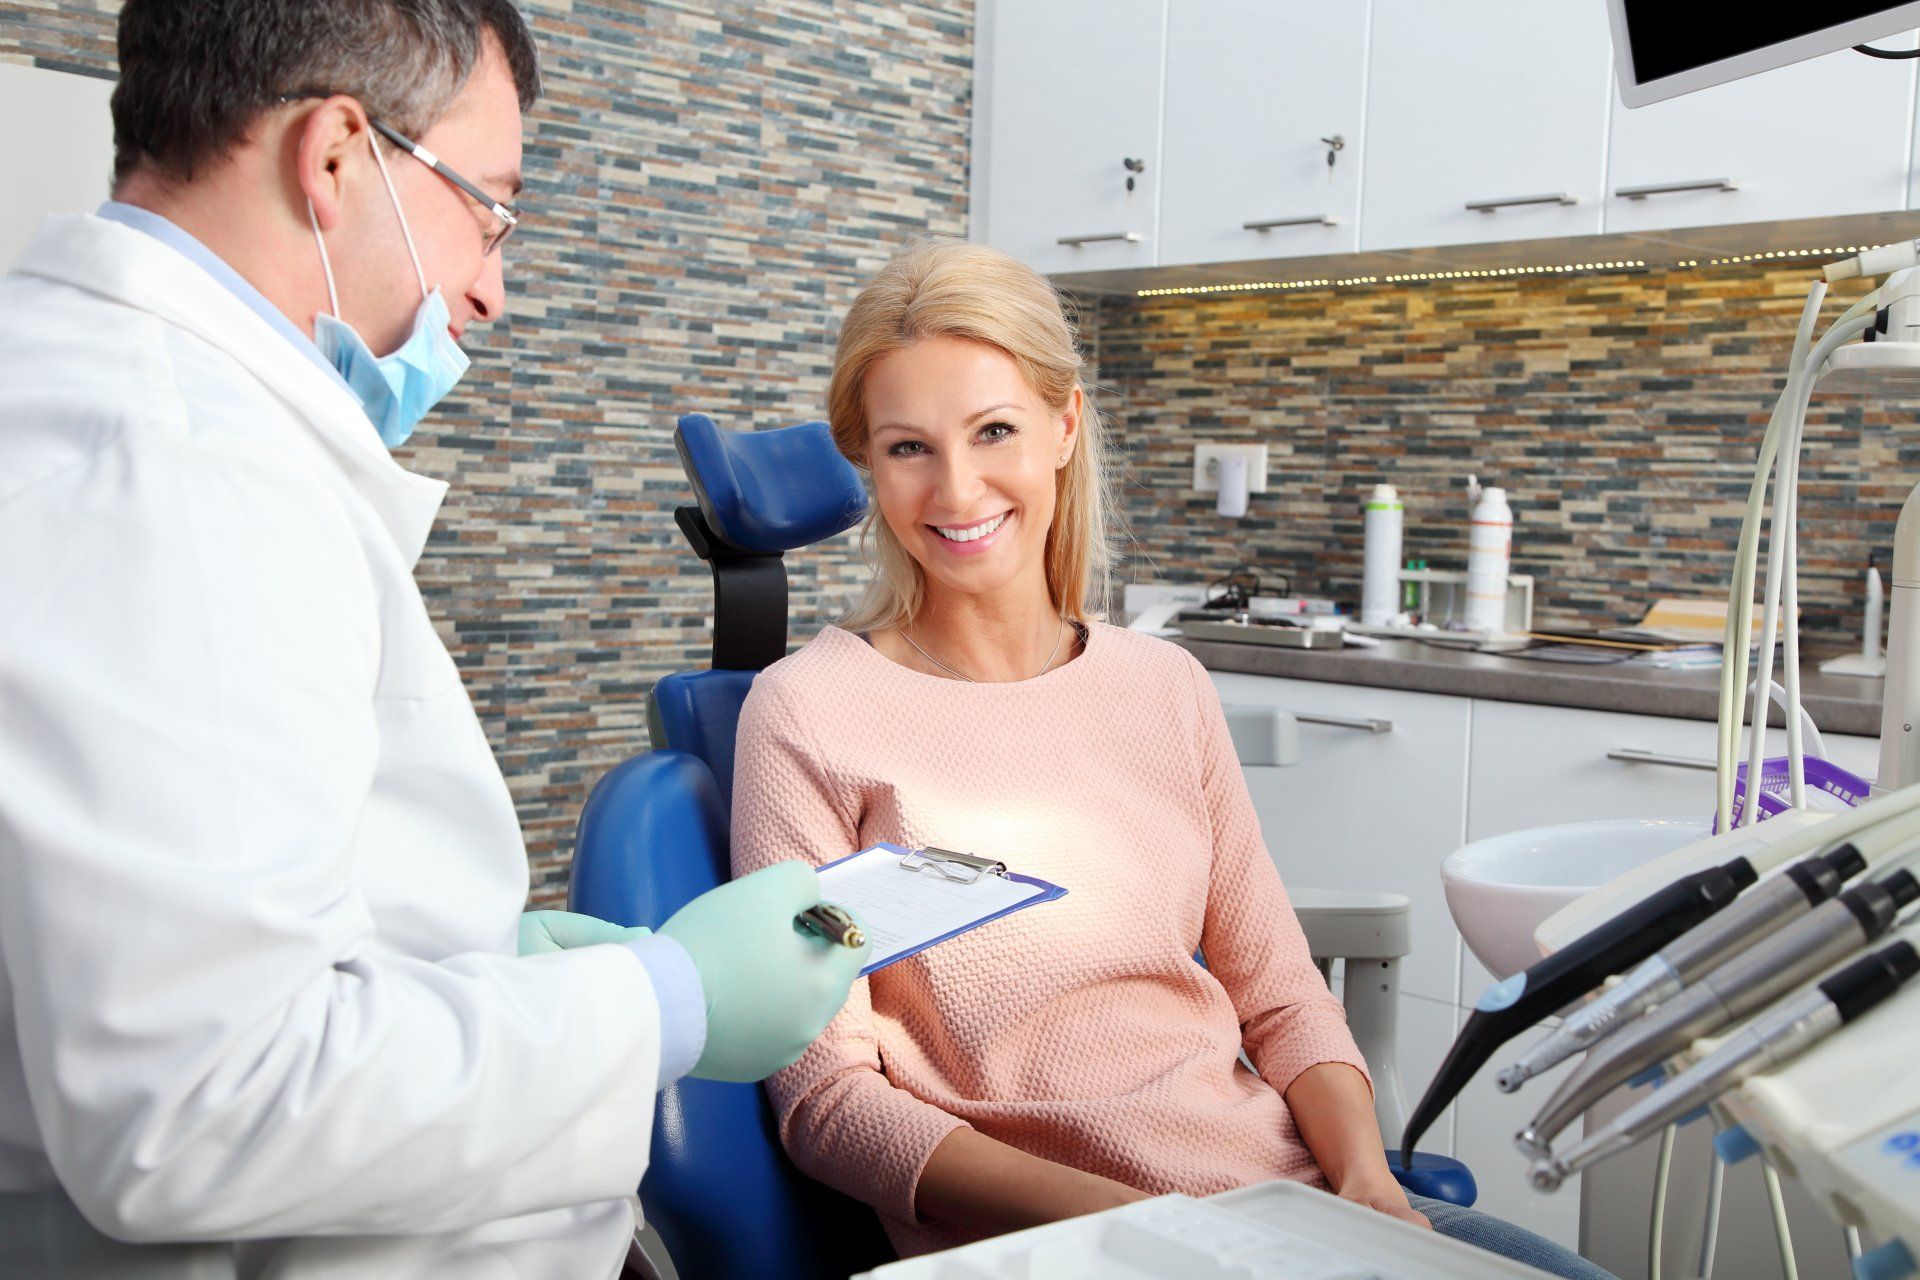 Dentist with white lab coat looks at smiling blonde female patient